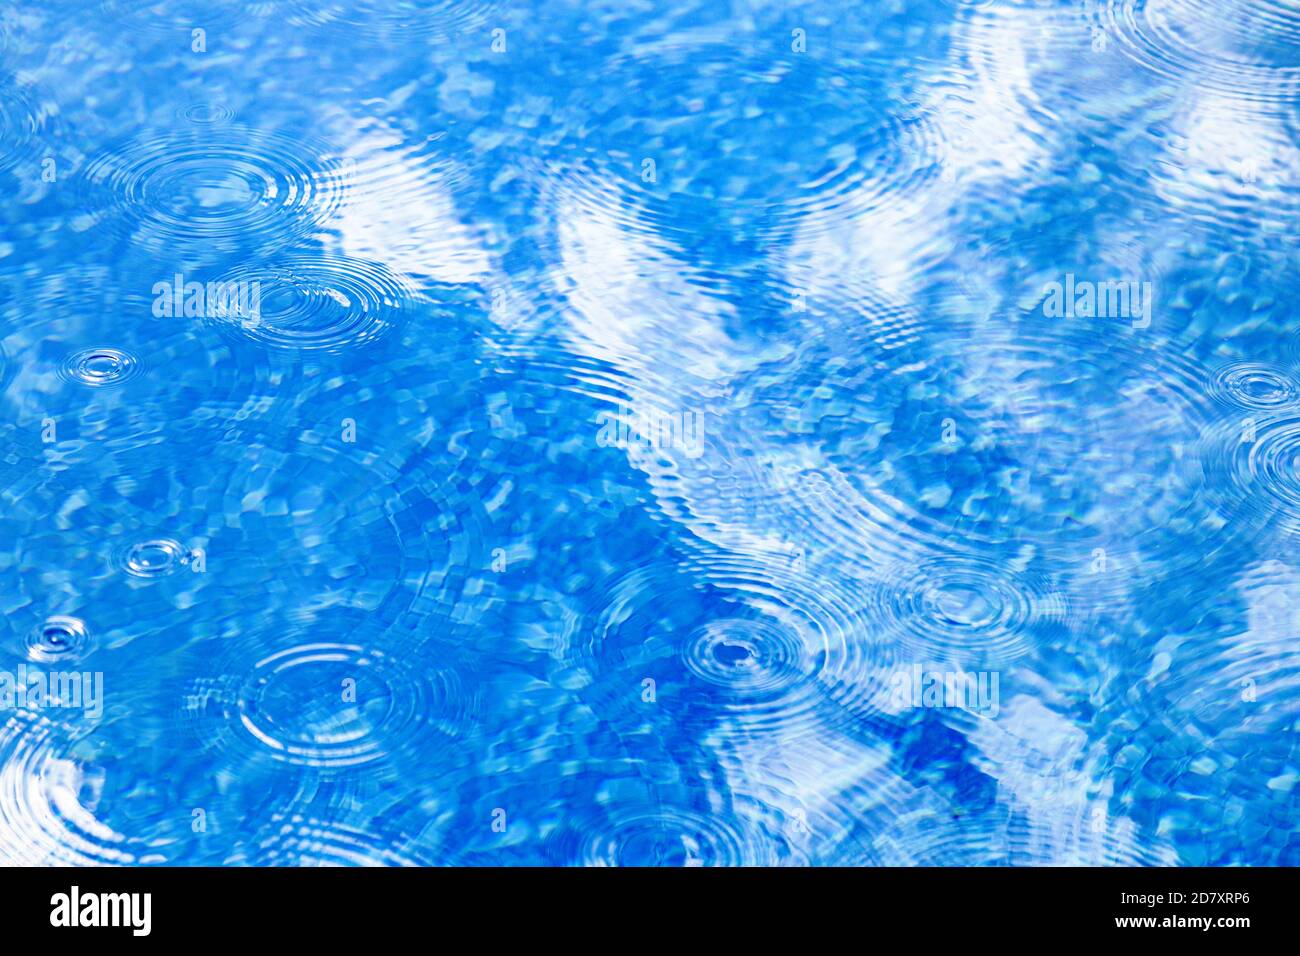 Raindrops on pool blue water surface. Blue water texture as background. Stains circles on the water from rain Stock Photo